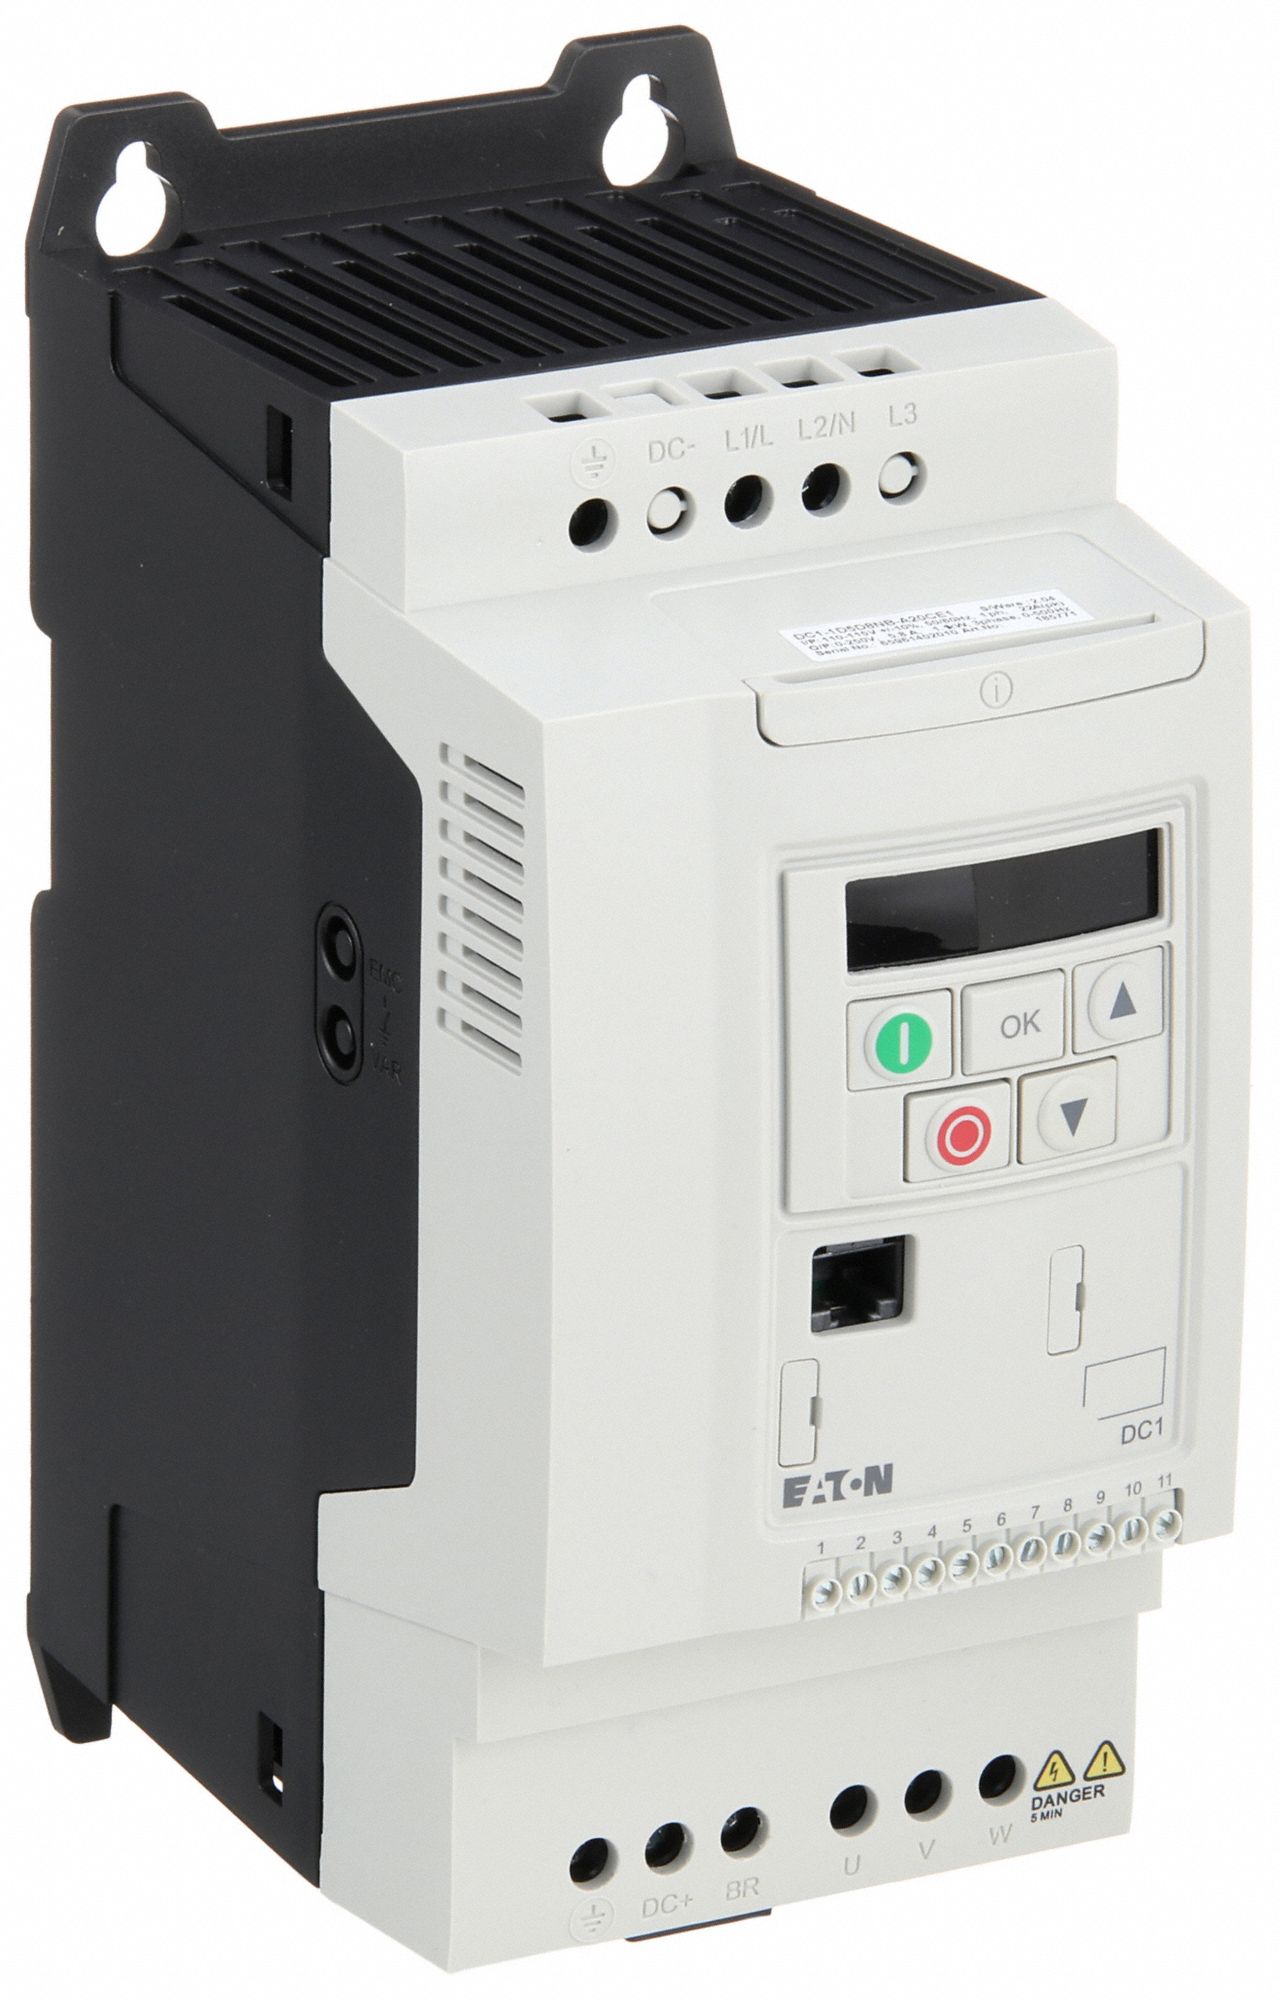 2 HP Variable Frequency Drive